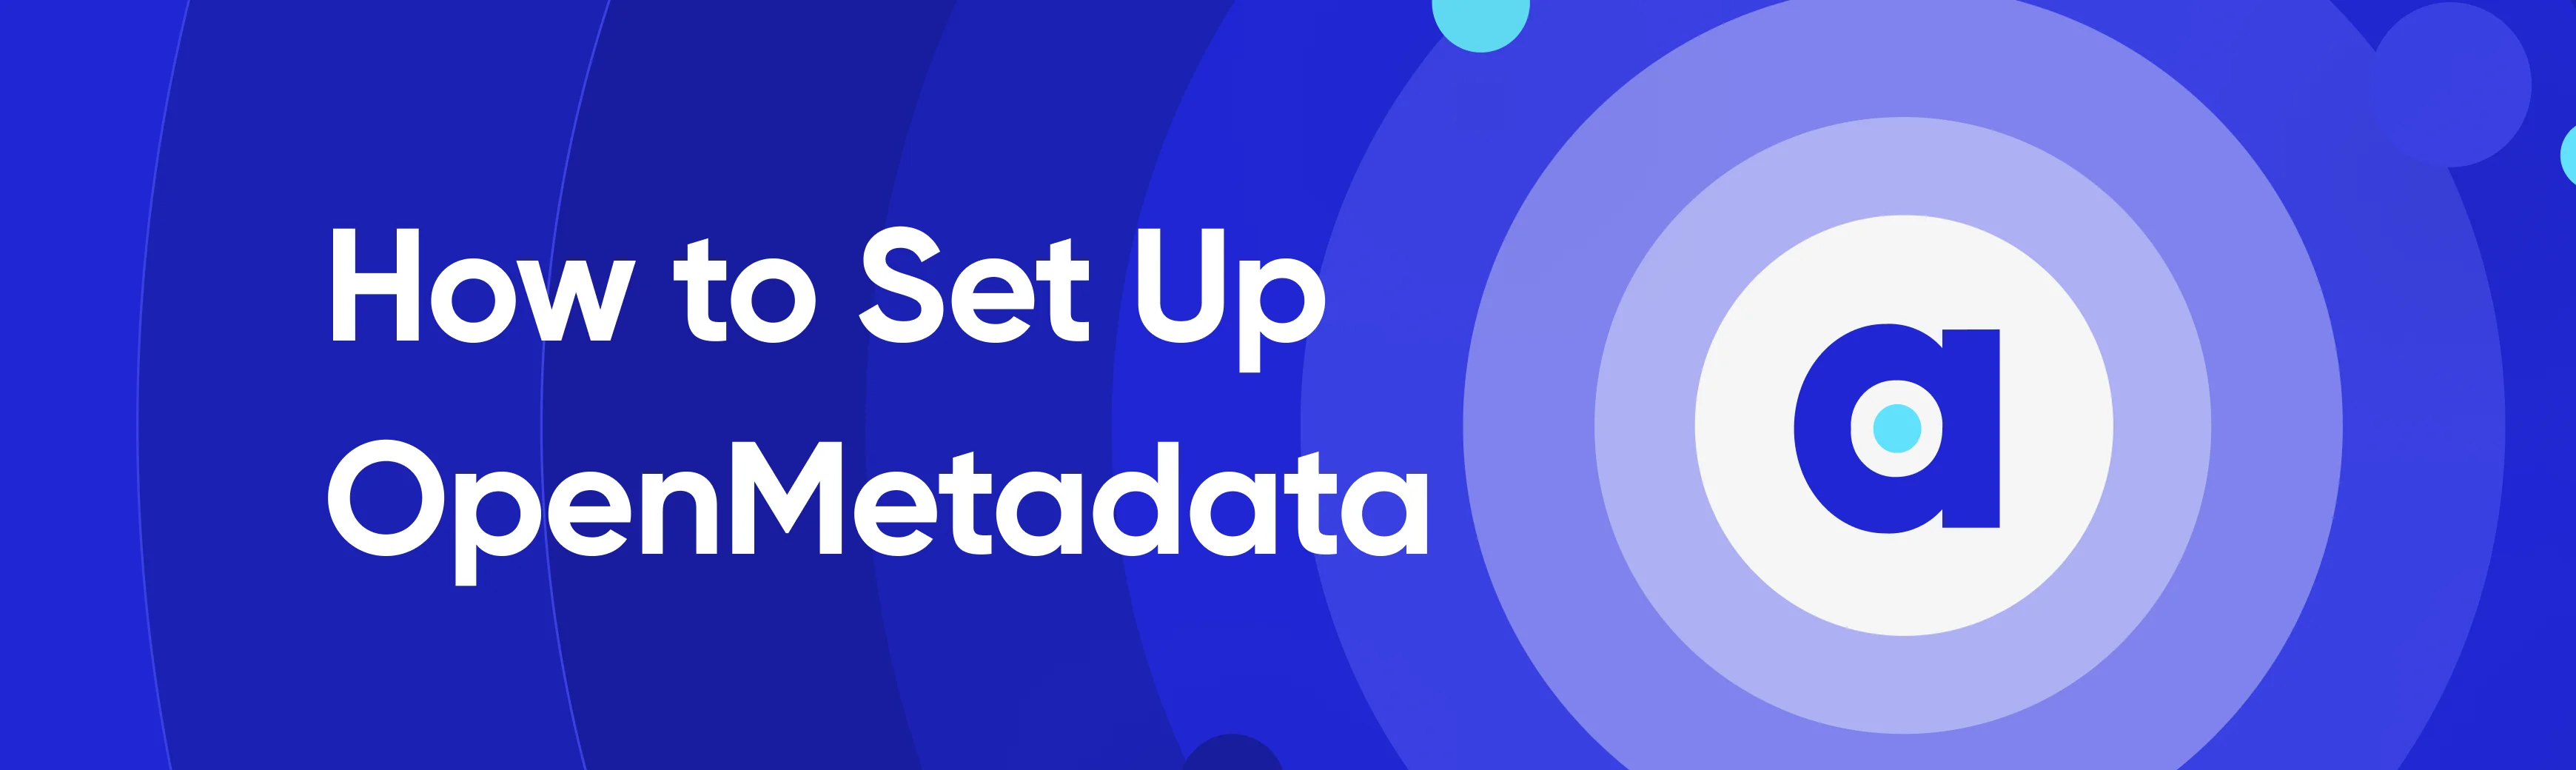 How to Set Up OpenMetadata